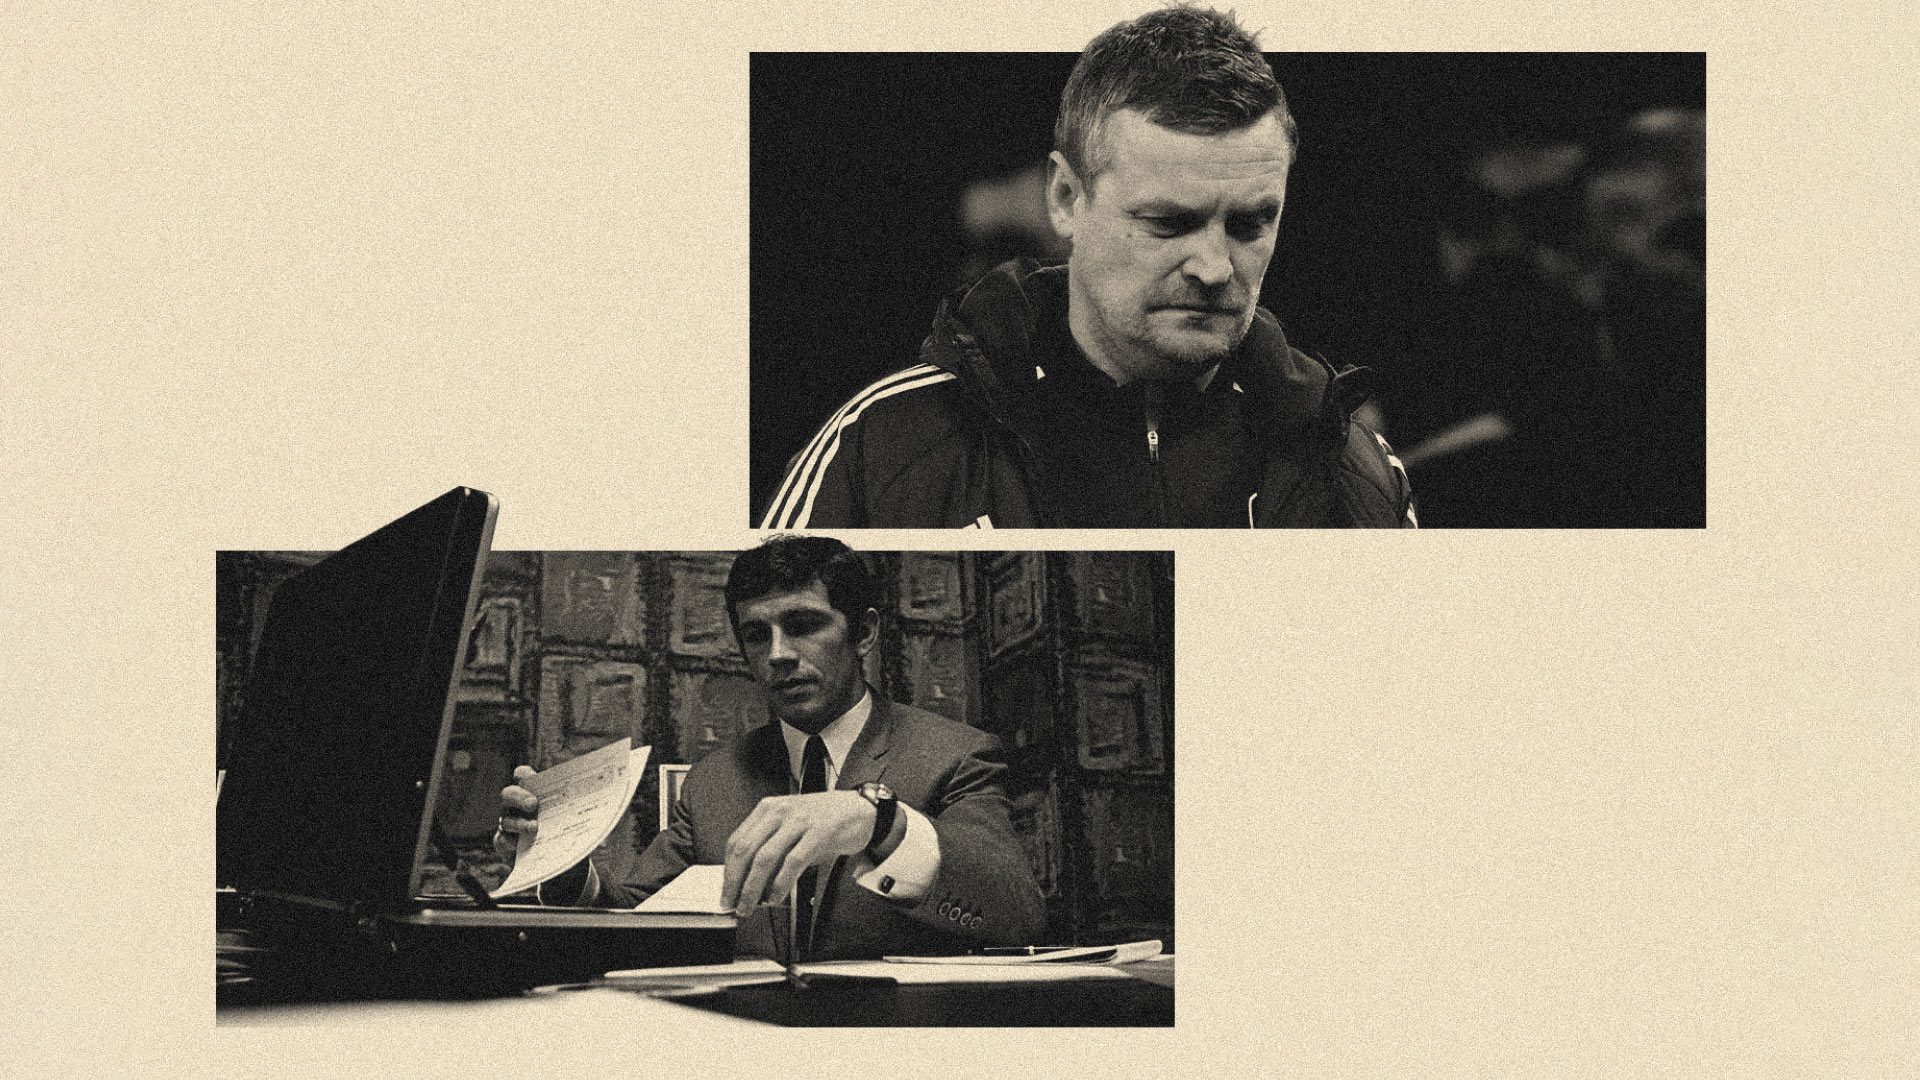 Johnny Giles wearing a suit, looking at some important documents in a suitcase, next to a photo of Michael 'Skubes' Skubala